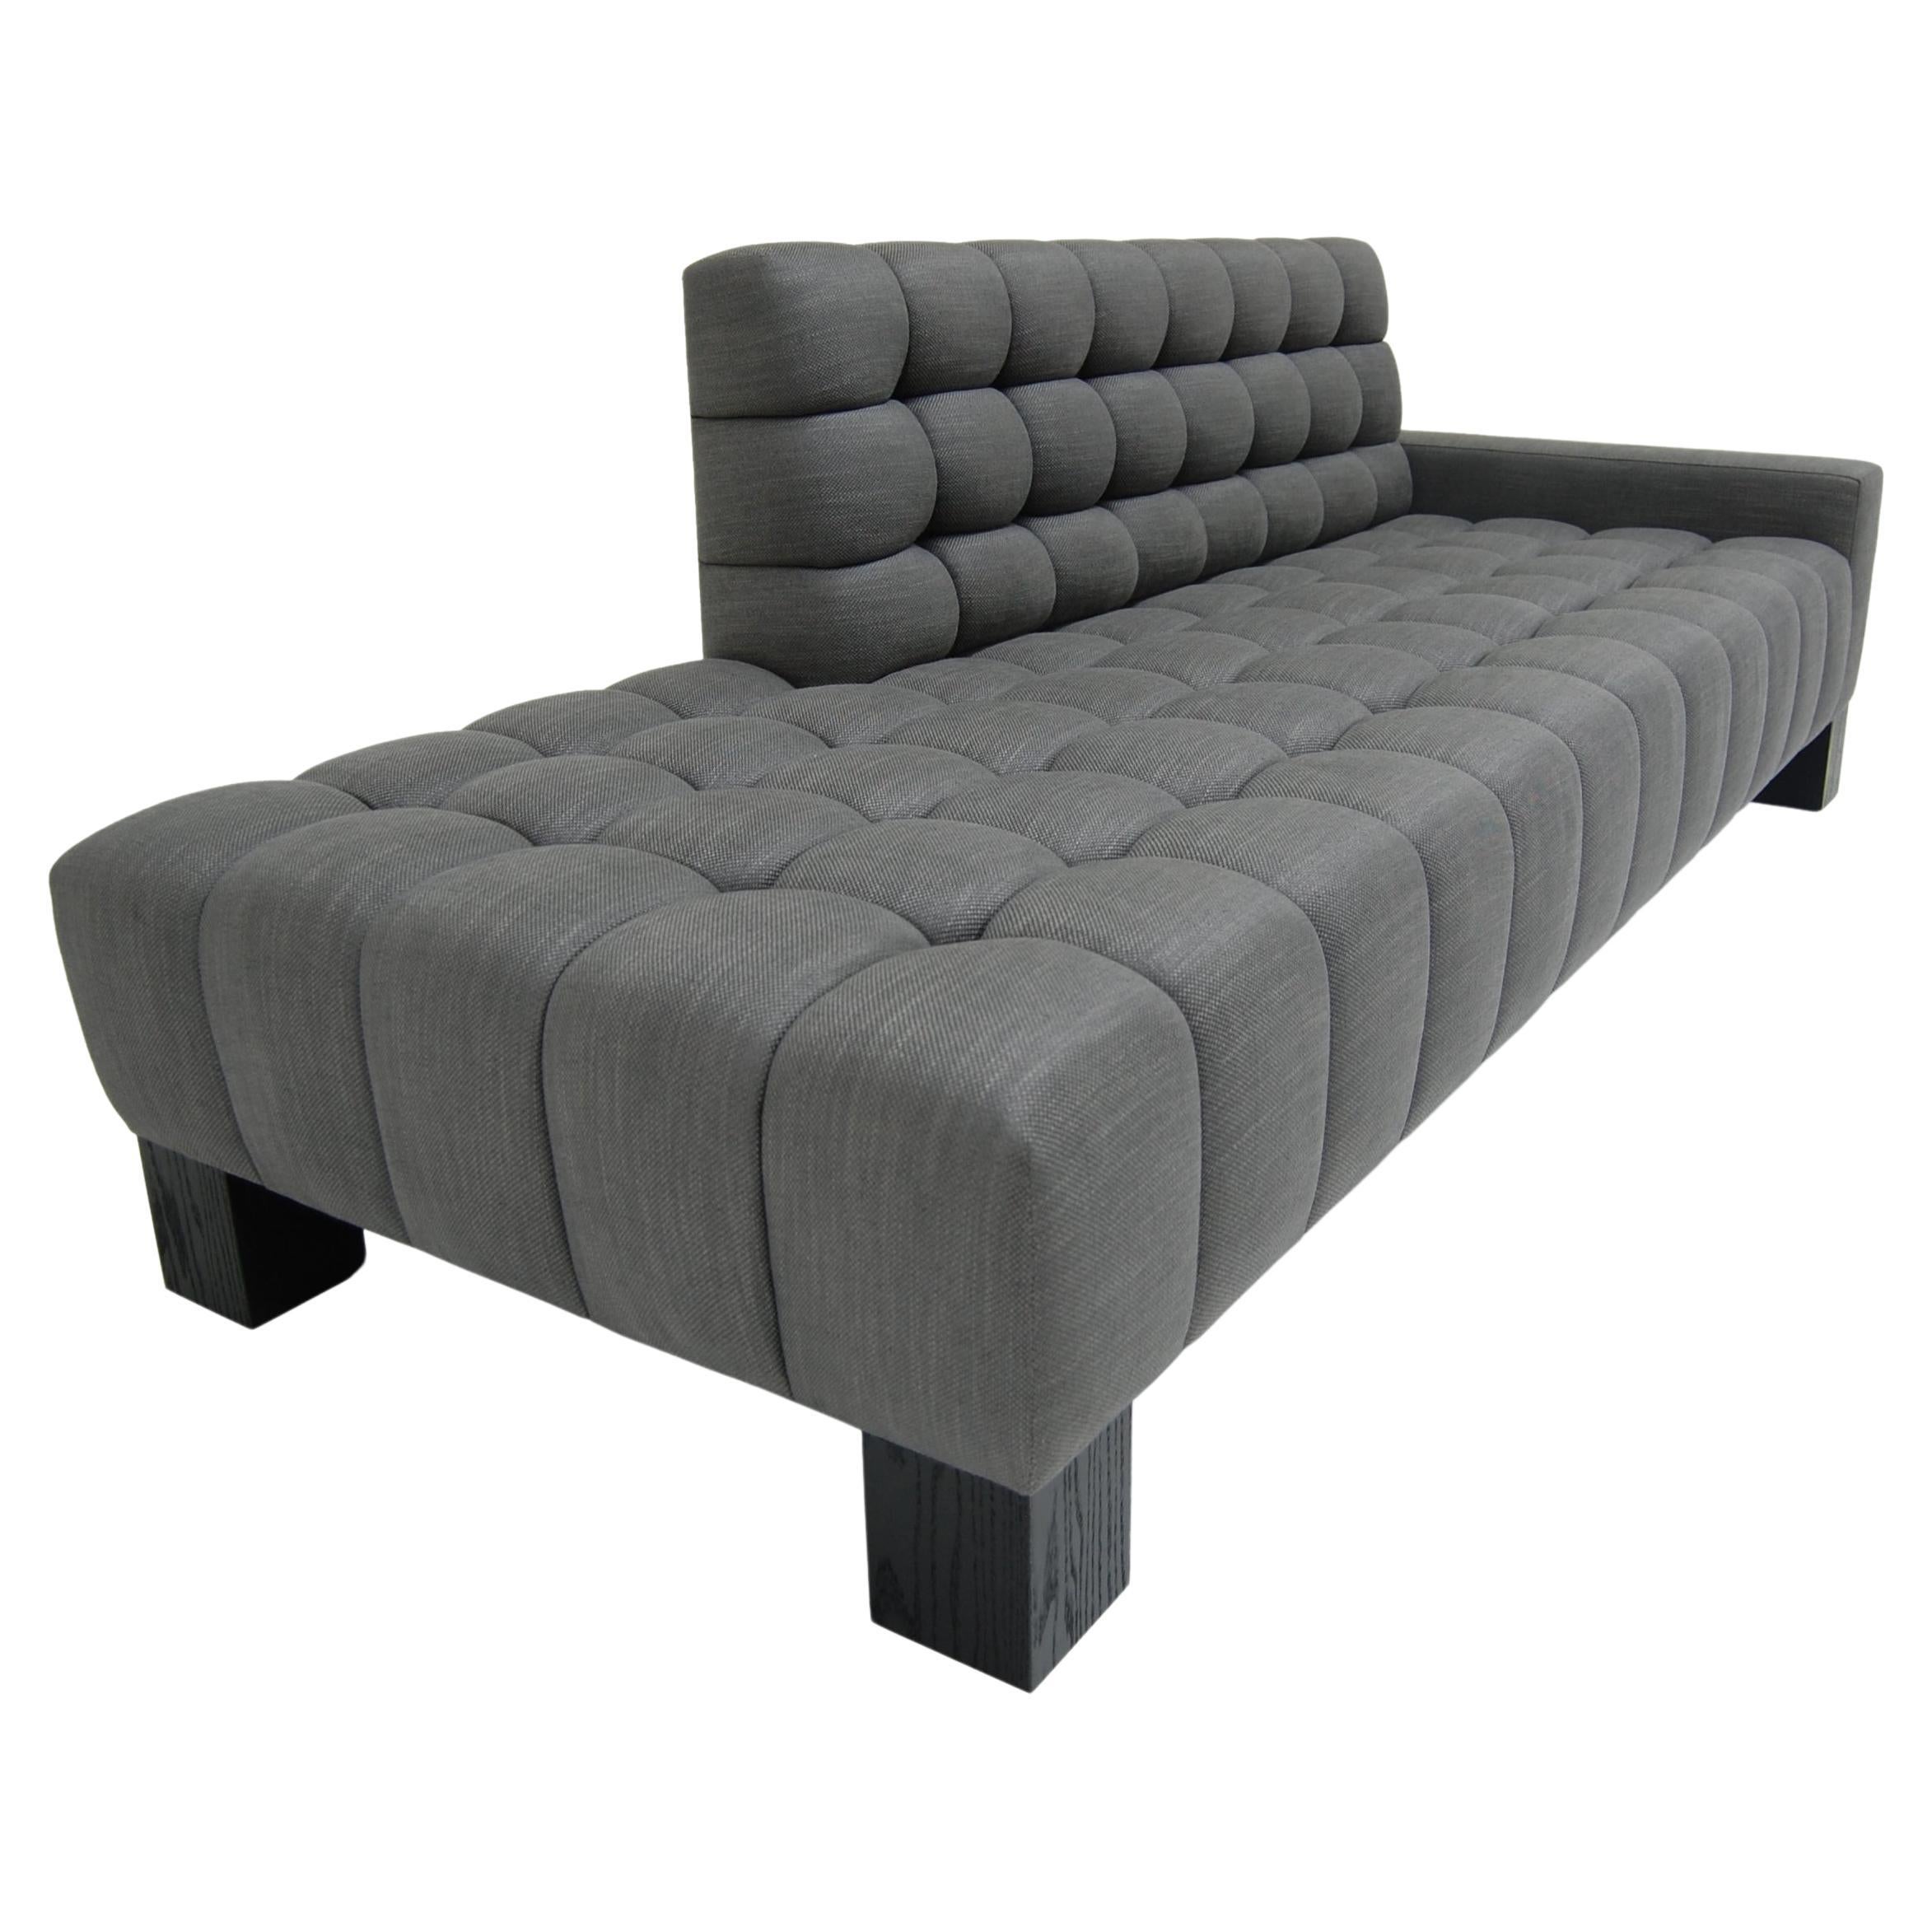 Abyss Mini Sofa Chaise Channeling Deep Tufted Wood Legs Grey Custom For Sale